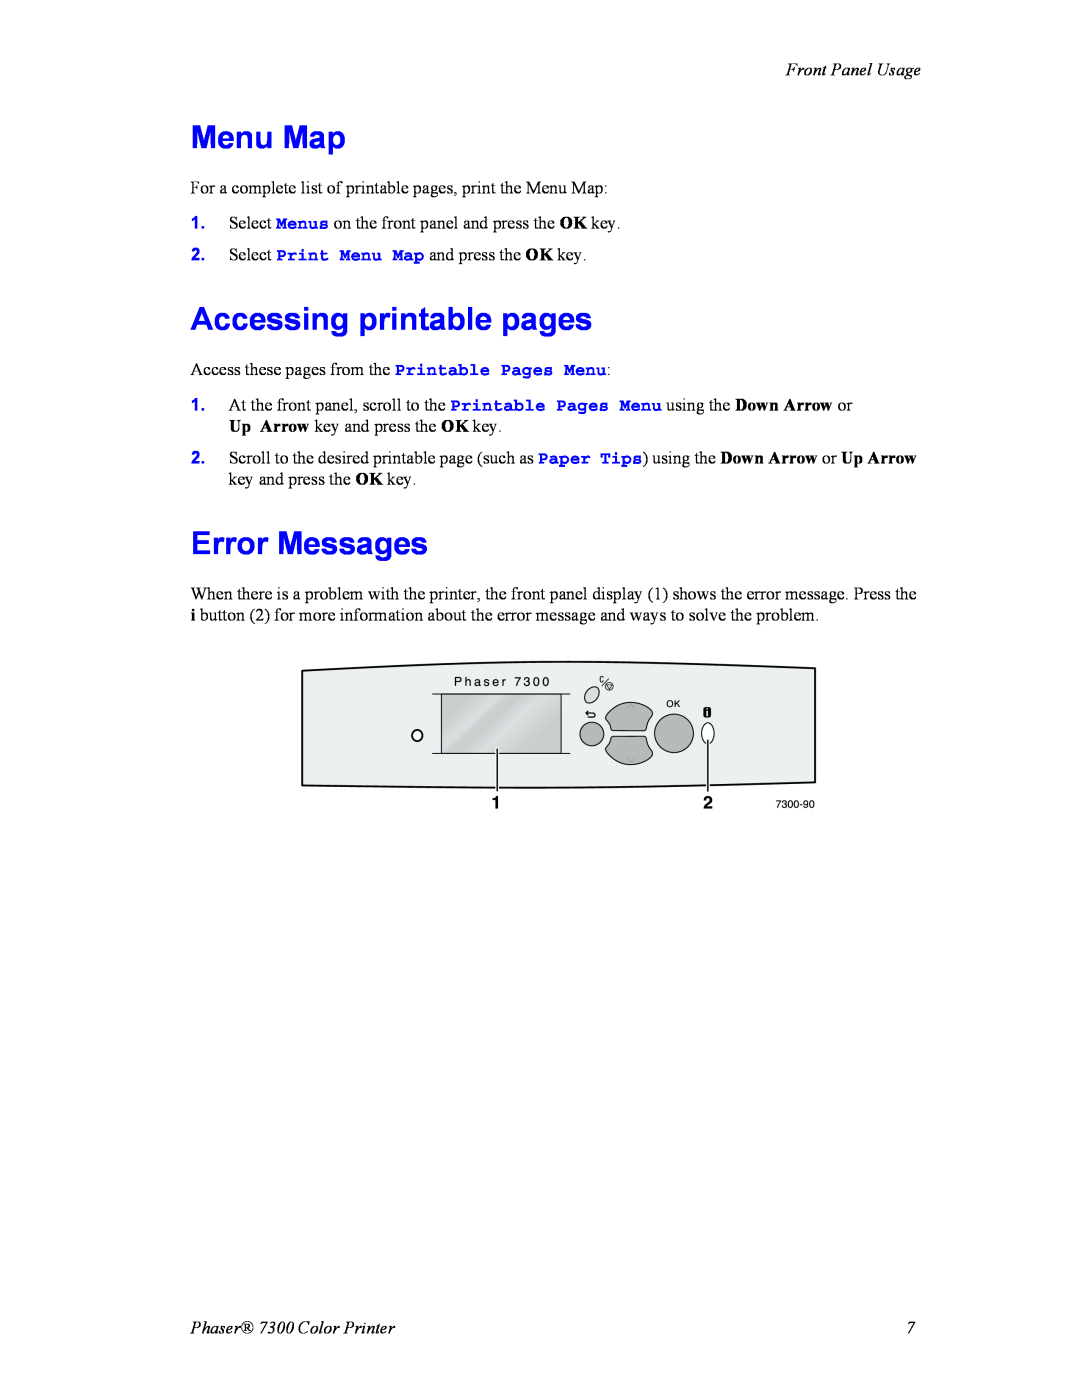 Xerox Phaser 7300 manual Menu Map, Accessing printable pages, Error Messages, Front Panel Usage, 7300-90, Phas1er7300 